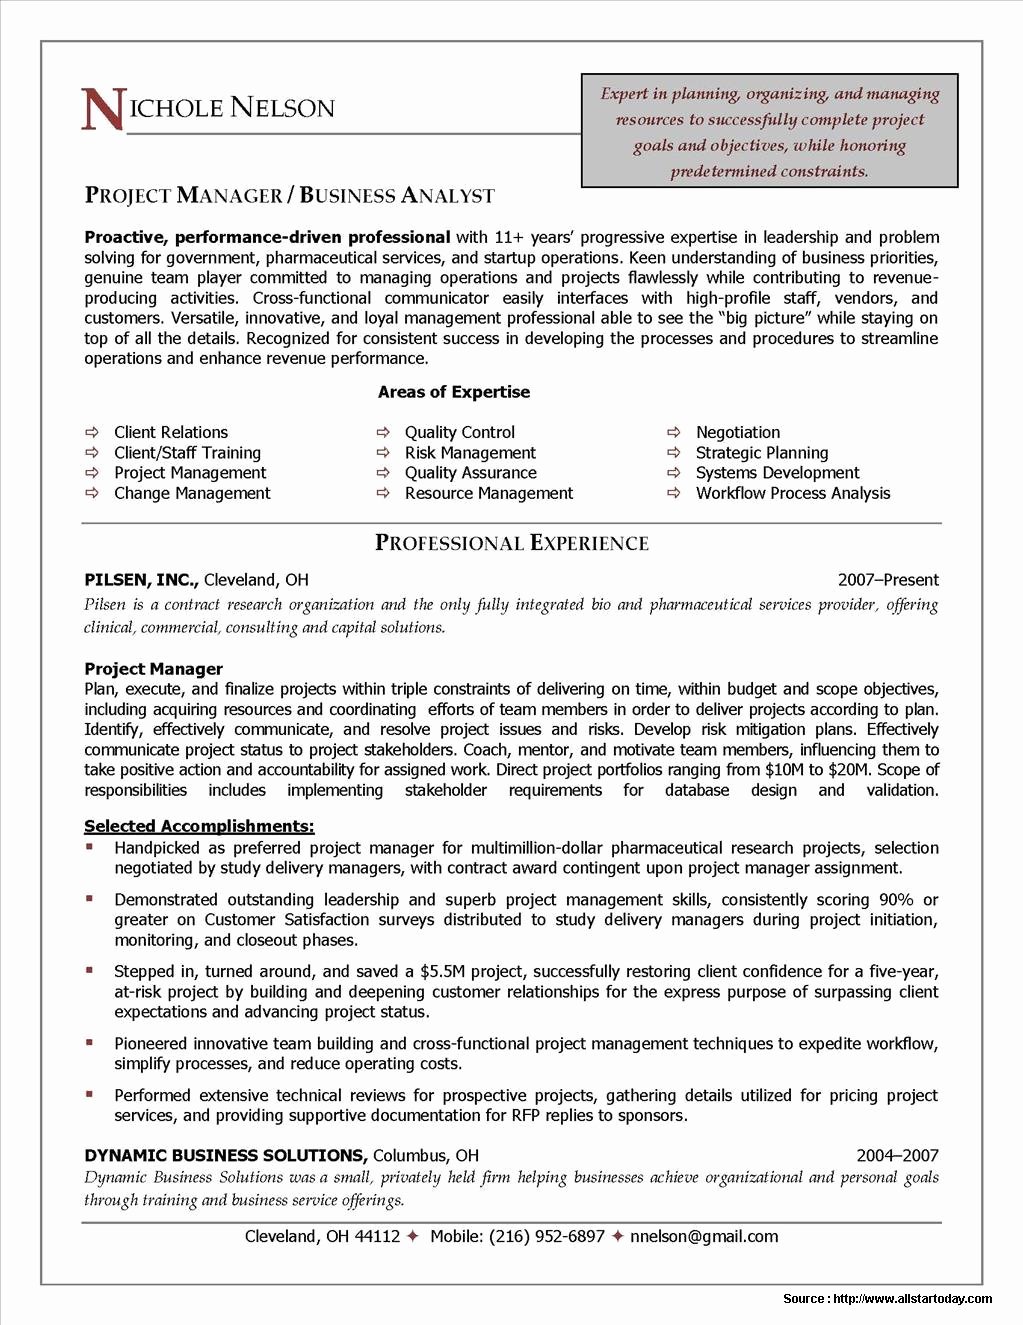 Sample Resume for Project Manager Position Resume